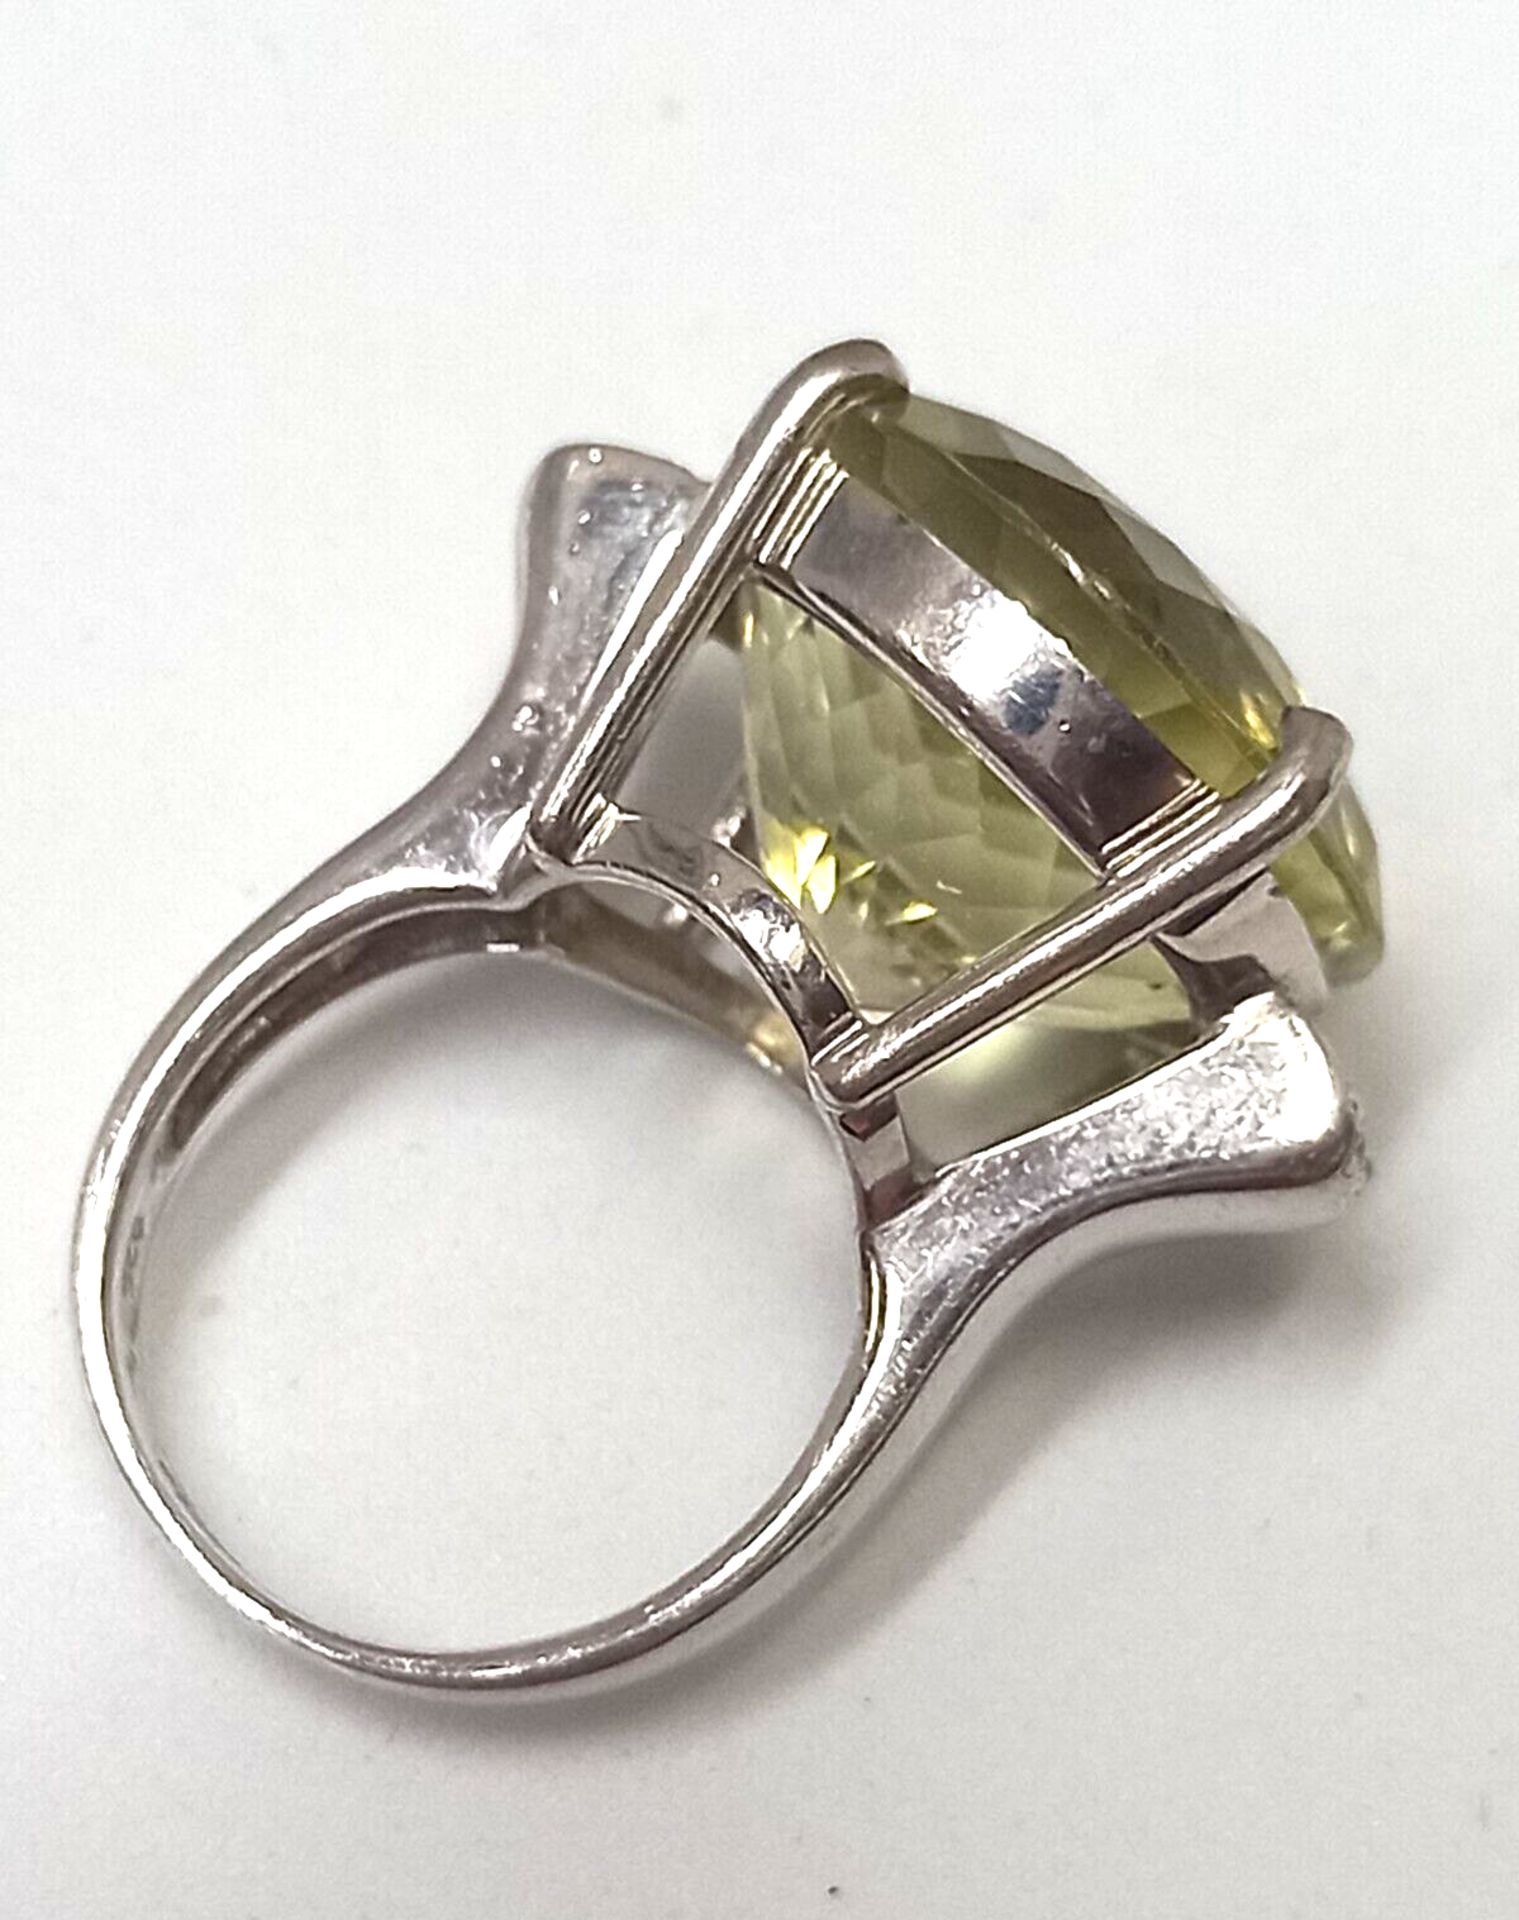 LIME GREEN CRYSTAL DRESS RING WITH DIAMONDS - Image 4 of 6